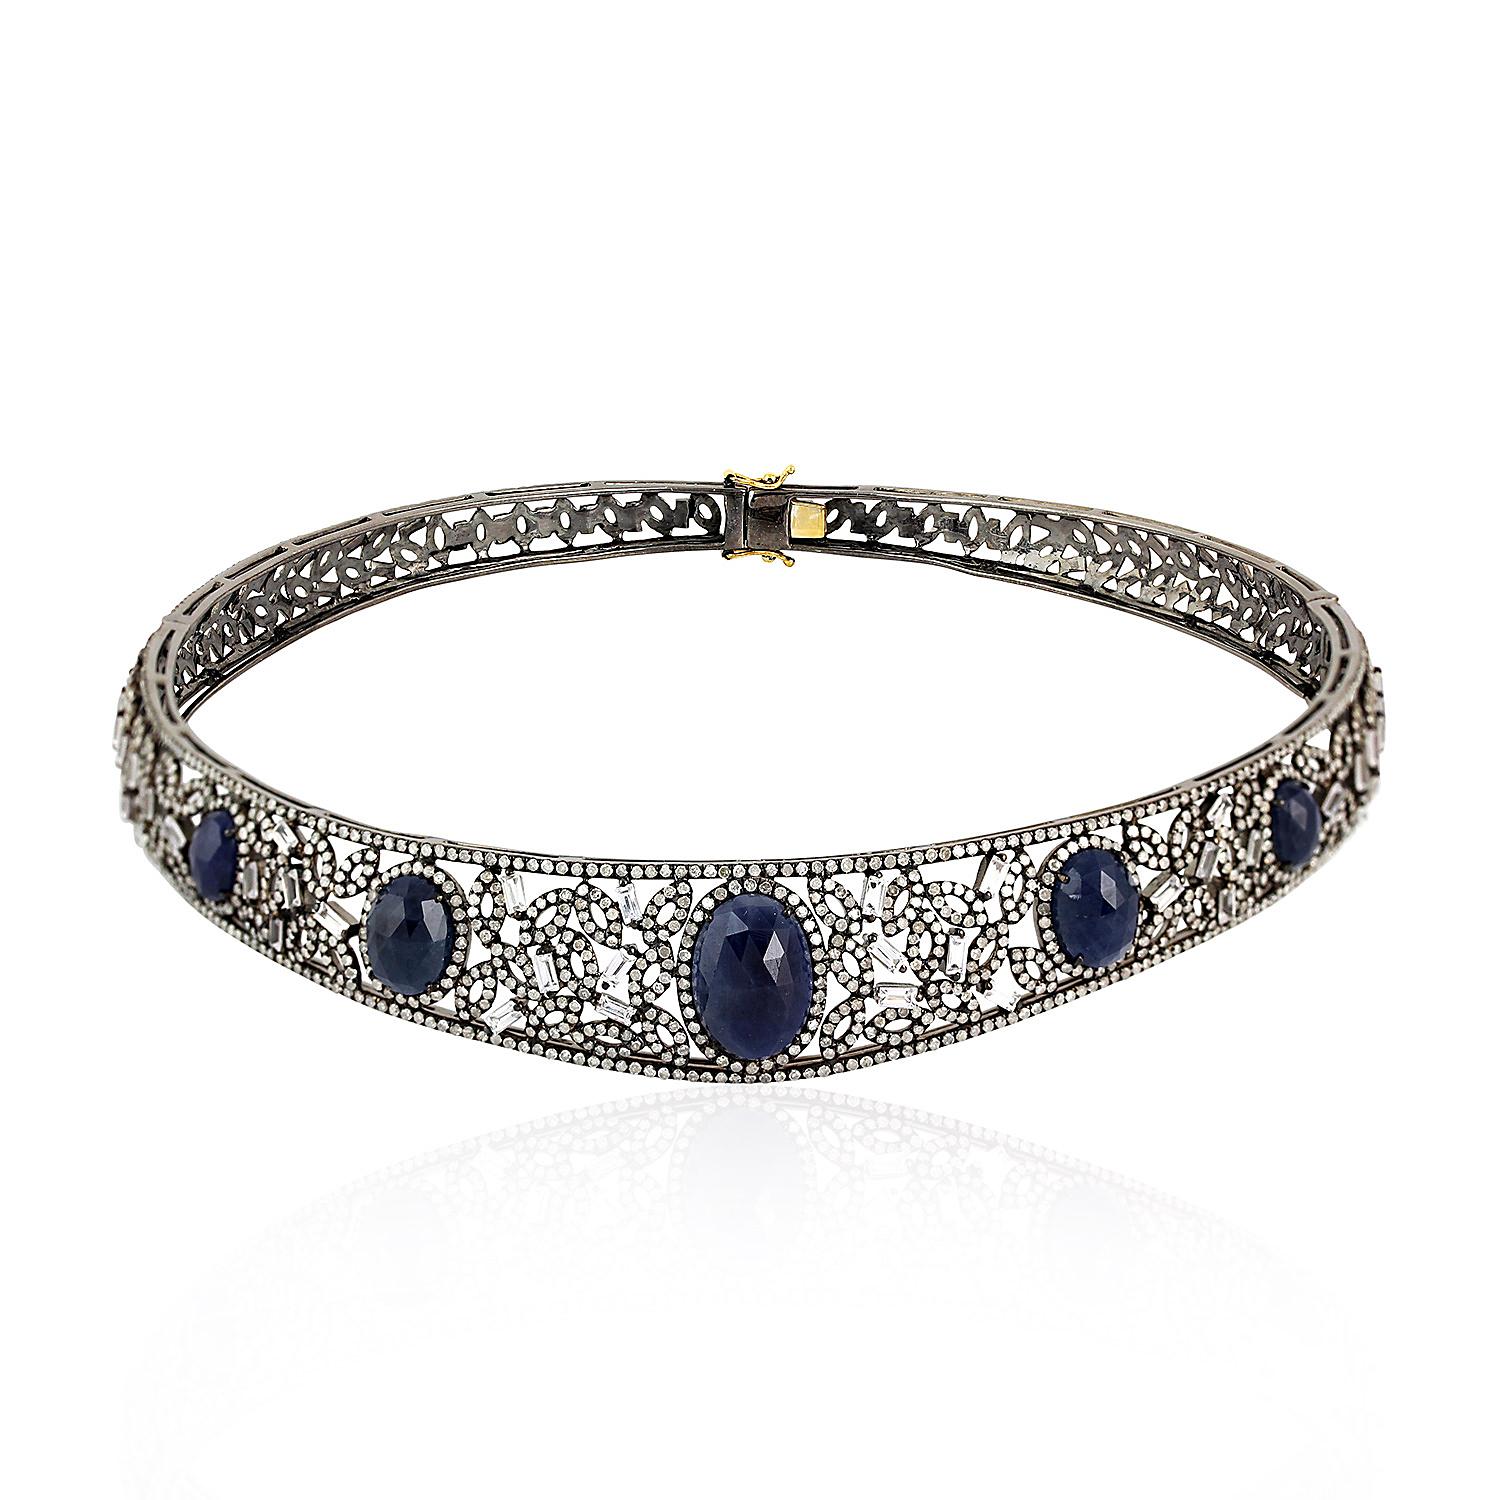 Choker Necklace With Oval Shaped Sapphires & Pave Diamonds In 18k Gold & Silver In New Condition For Sale In New York, NY